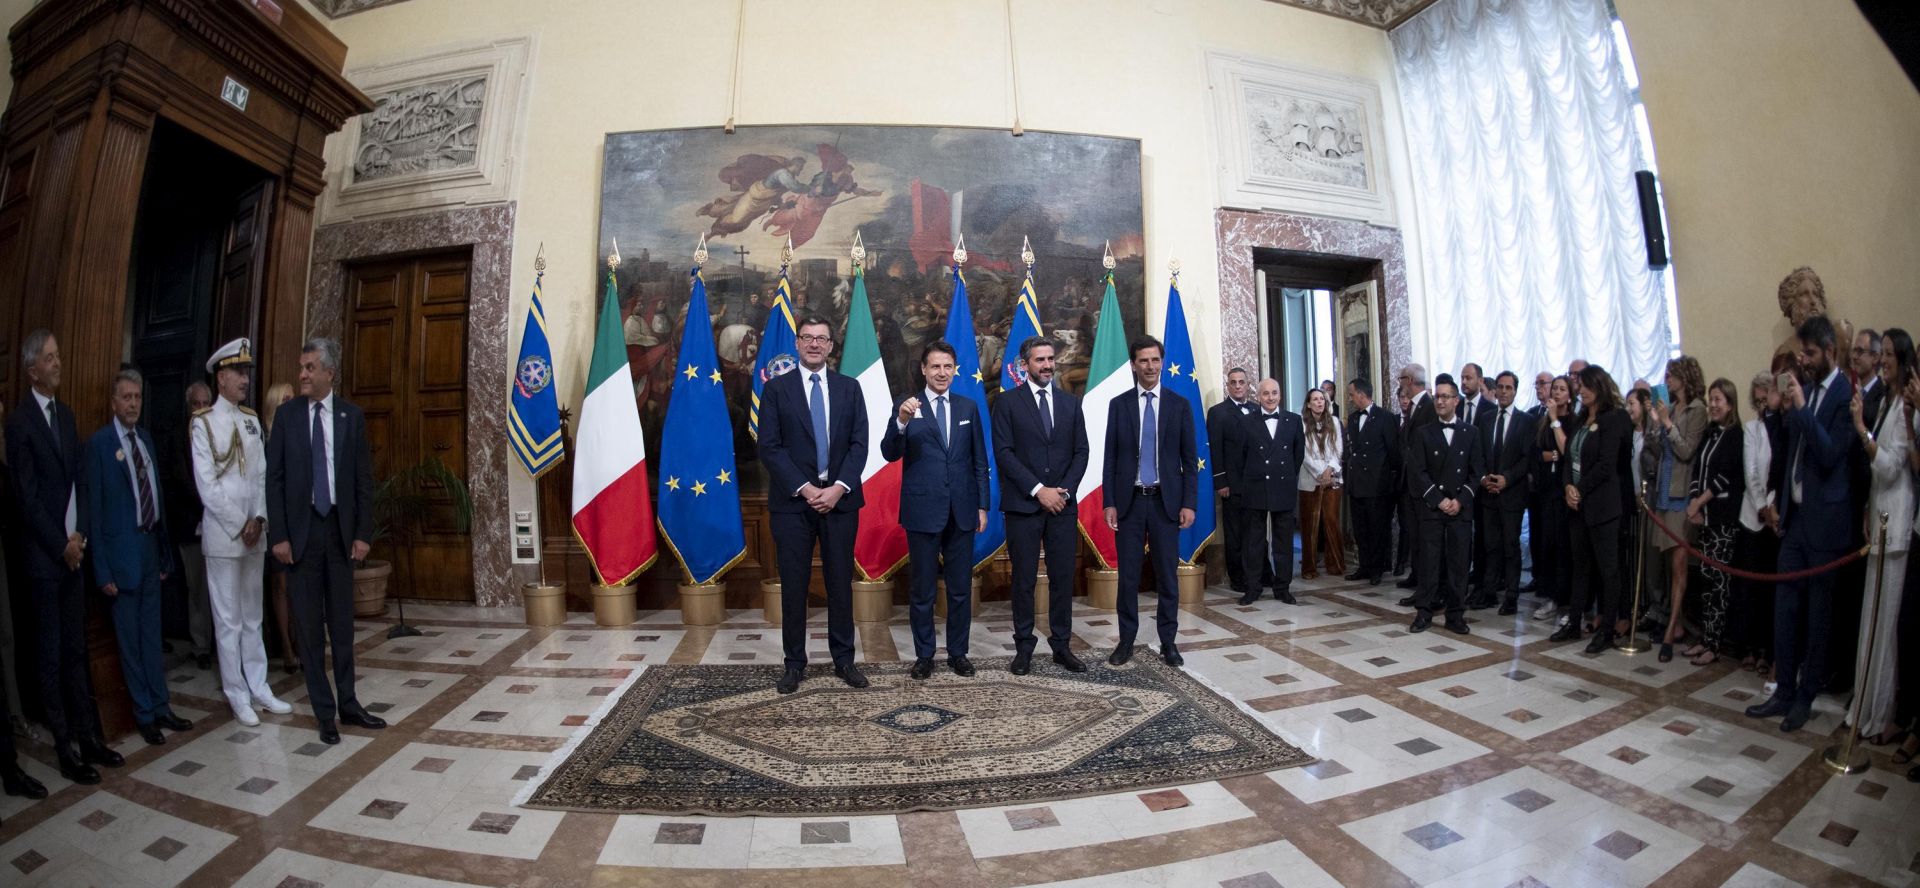 epa07819752 Italian Premier Giuseppe Conte (2-L) during the bell ceremony with former cabinet secretary Giancarlo Giorgetti (L), his successor in that role Riccardo Fraccaro (2-R) and Chigi Palace general secretary Roberto Chieppa (R), Rome, Italy, 05 September 2019. Conte's new government is a coalition between the anti-establishment 5-Star Movement (M5S) and the center-left Democratic Party (PD) that will have 21 ministers, 10 from the M5S, nine from the PD and one from the small leftwing Free and Equal (LeU) party, media reported.  EPA/MAURIZIO BRAMBATTI